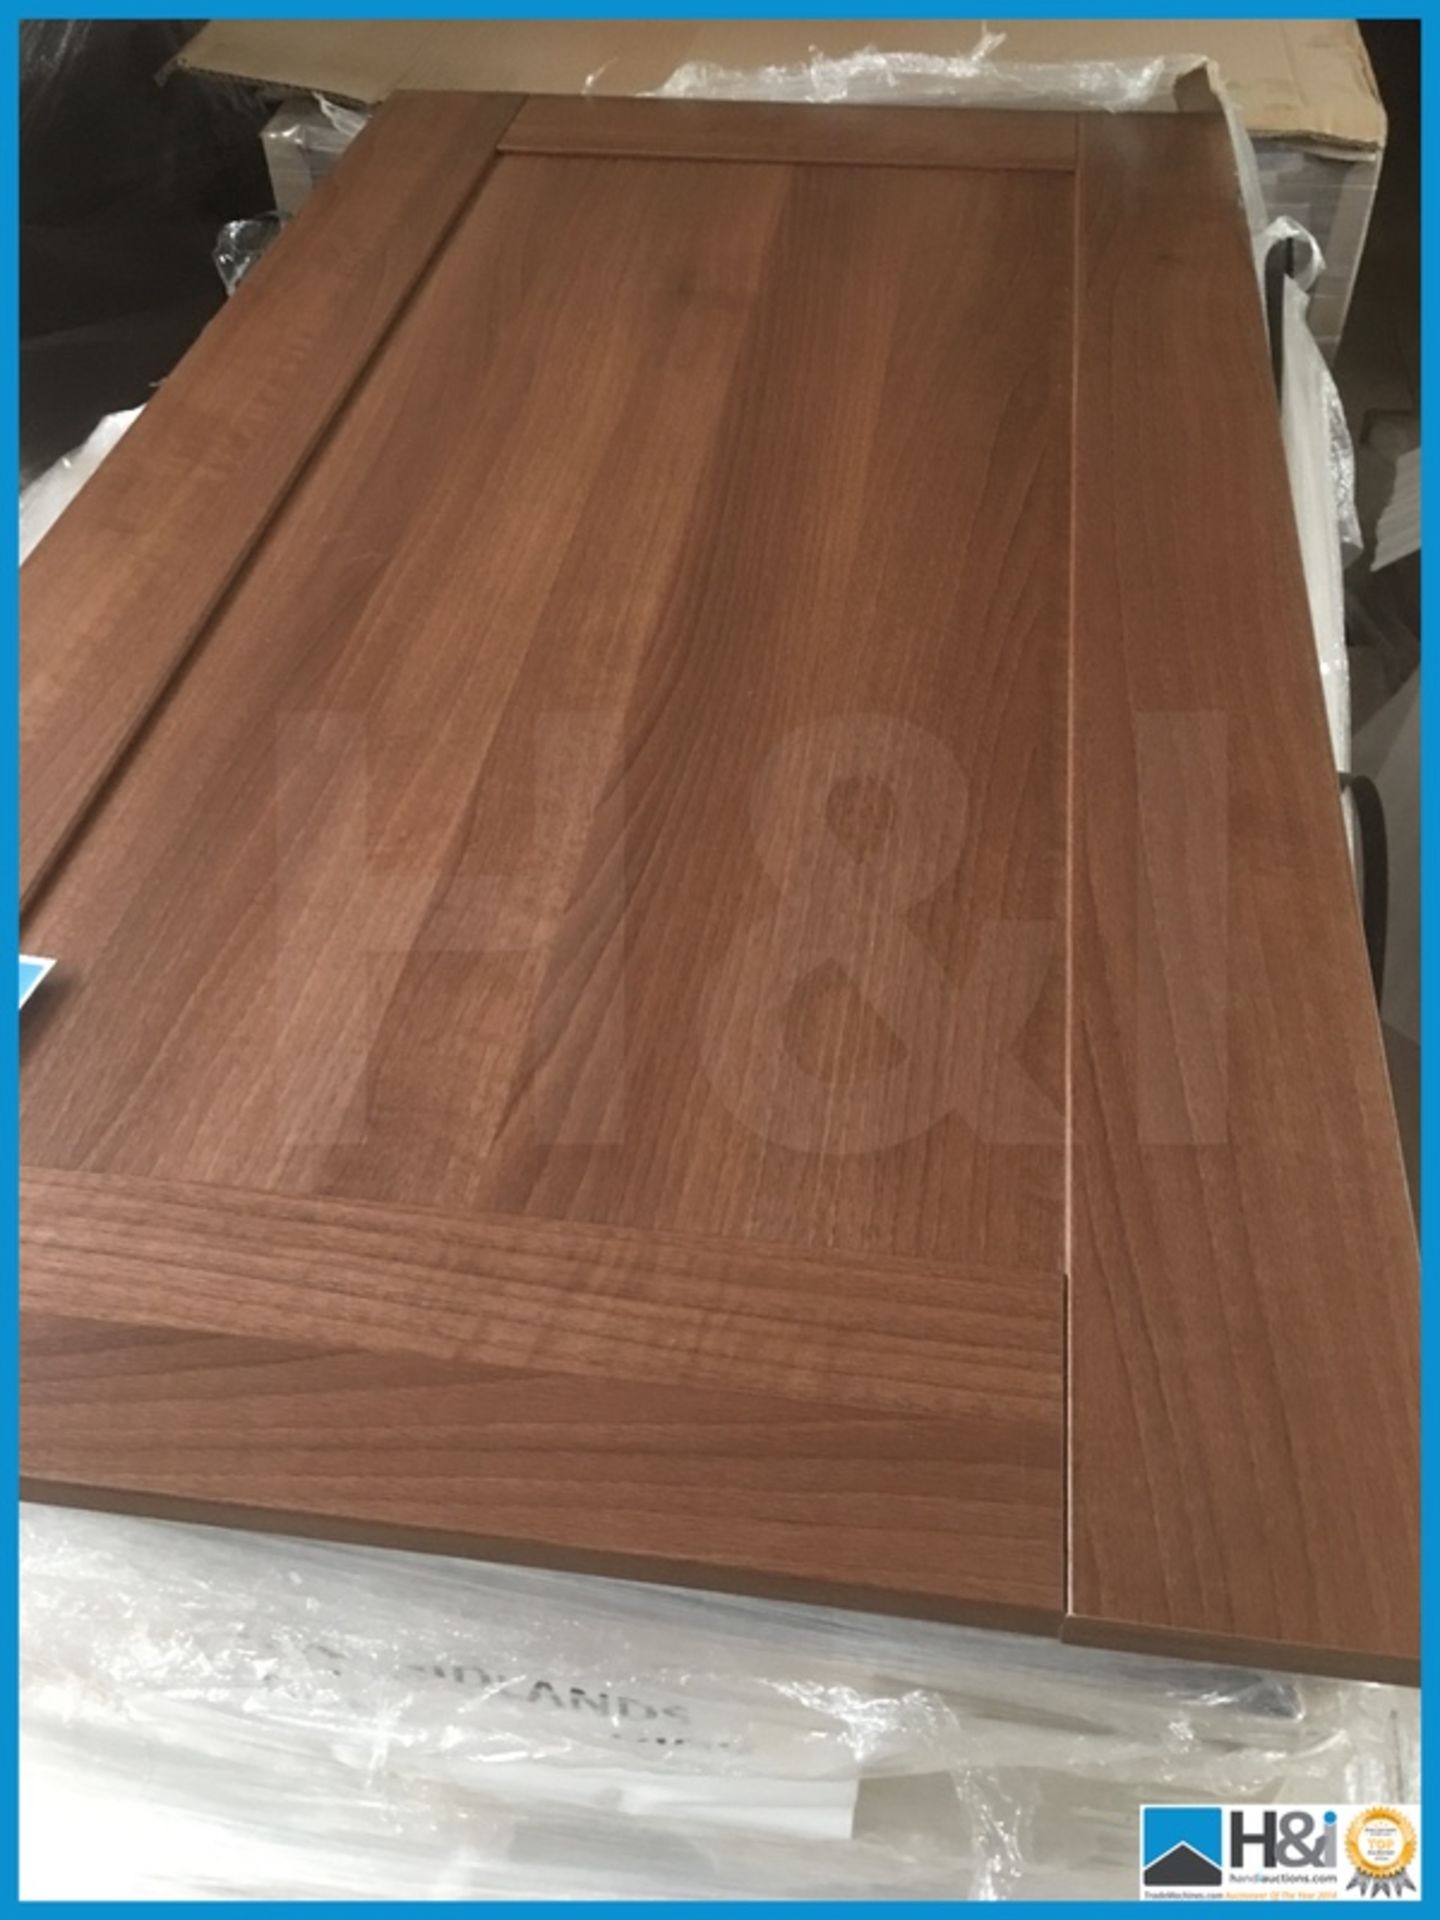 Approx x 28 1066 mm X 595 mm American walnut contemporary kitchen door with retail value of lot £ - Image 3 of 3